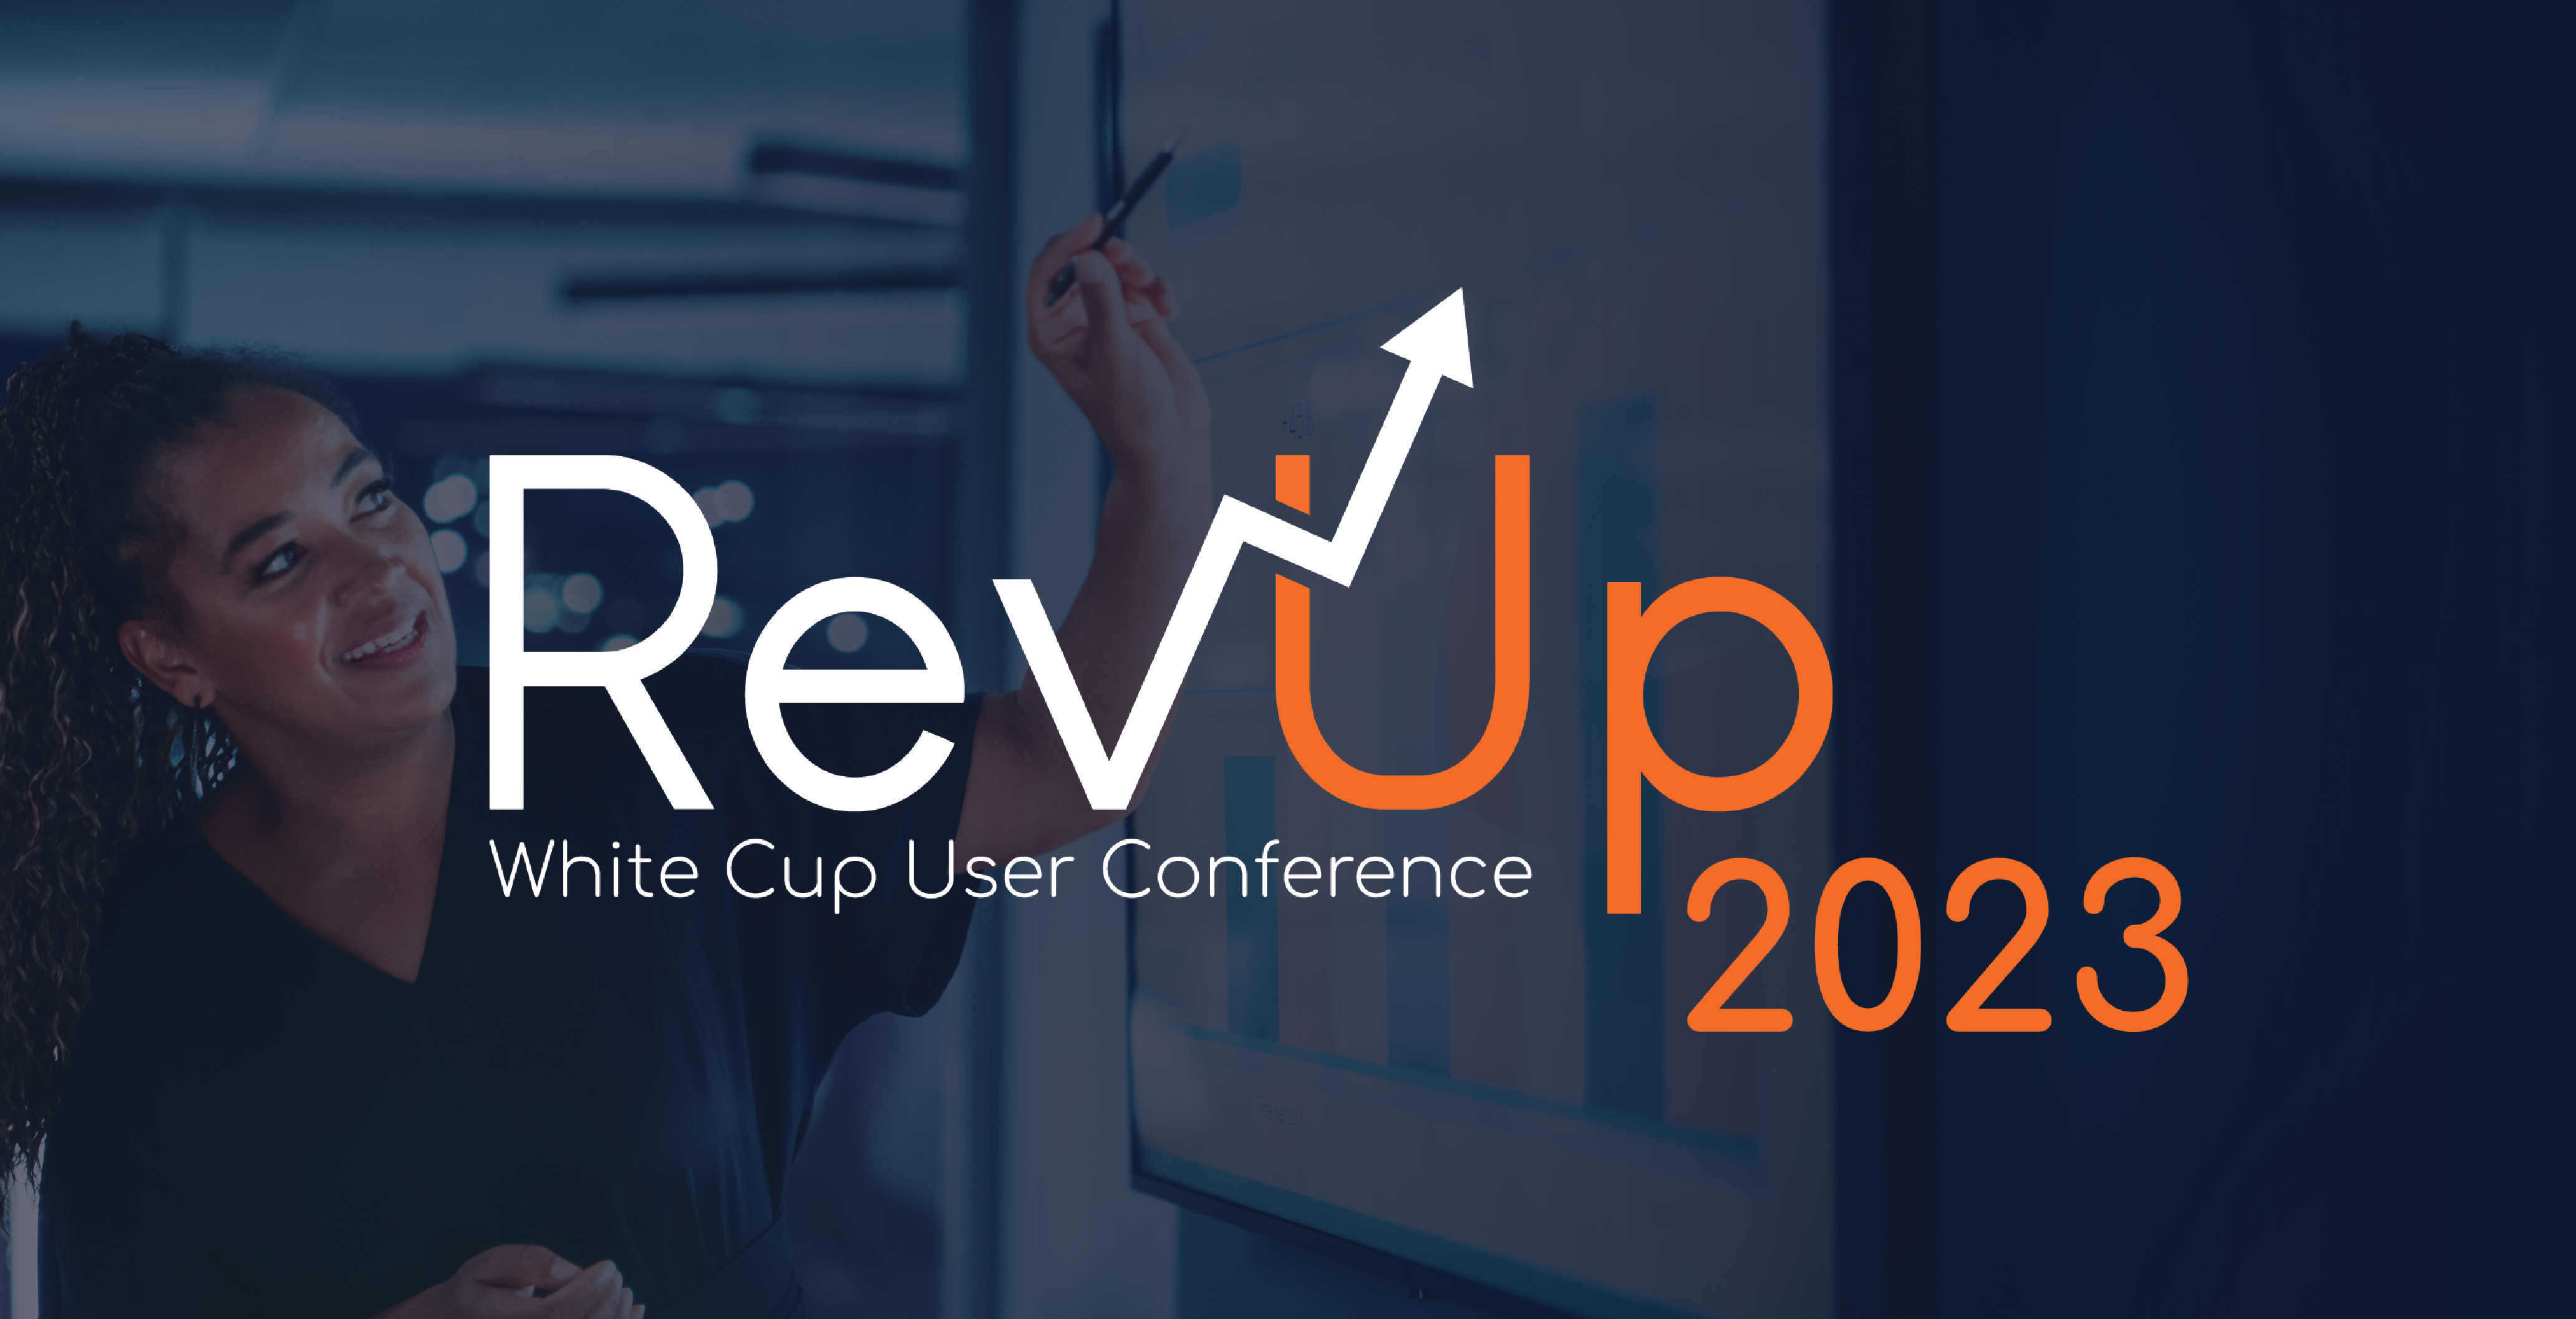 RevUp 2023_White Cup User Conference_Hero Images_Hero Image 1-03